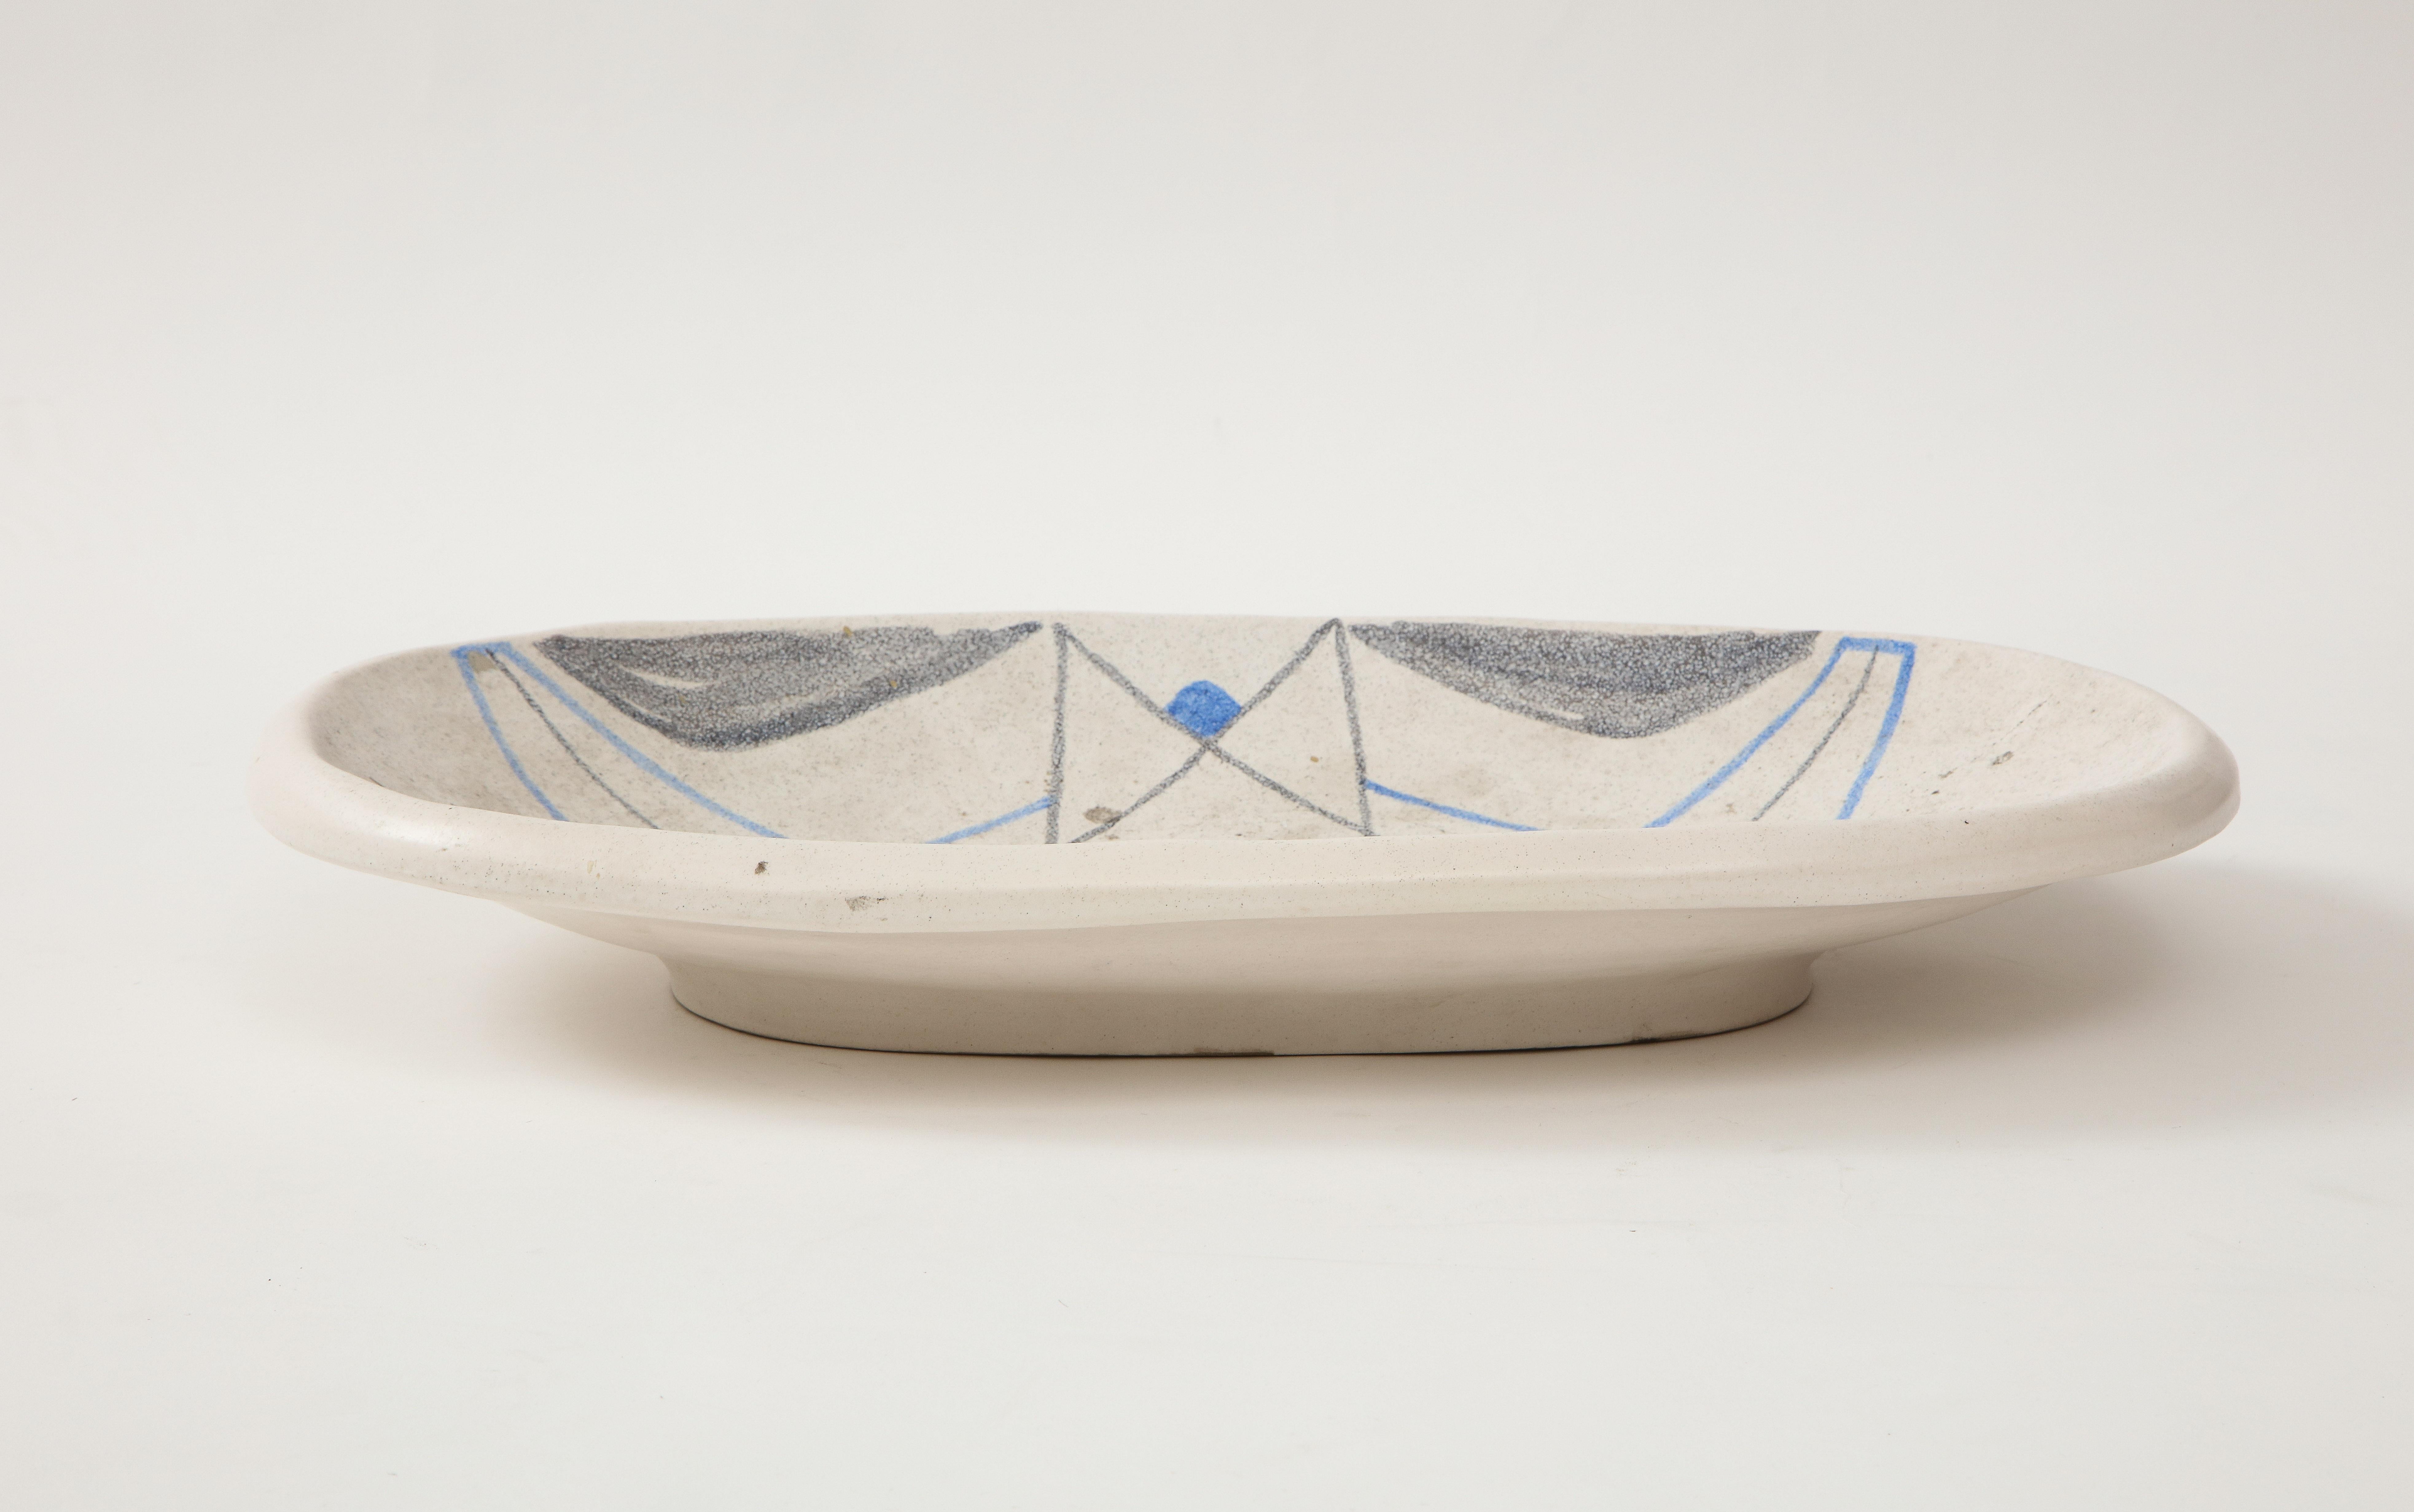 French Oval Ceramic Tray, Vallauris, France, circa 1950